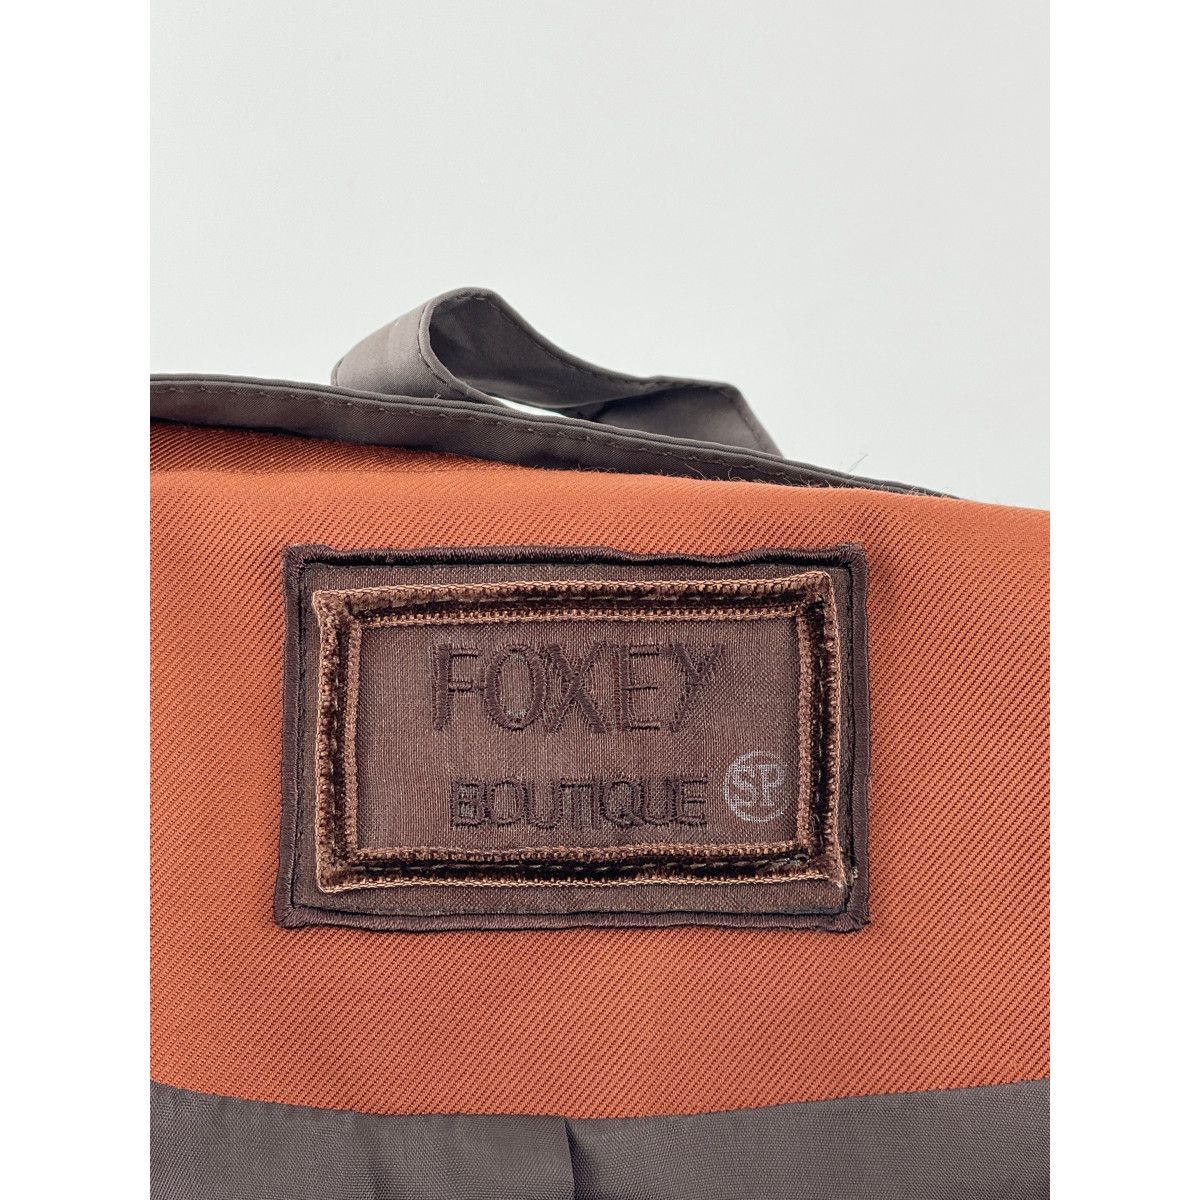 FOXEY BOUTIQUE フォクシーブティック 【新品同様】40440 FIRENZE フード付 ロング 38